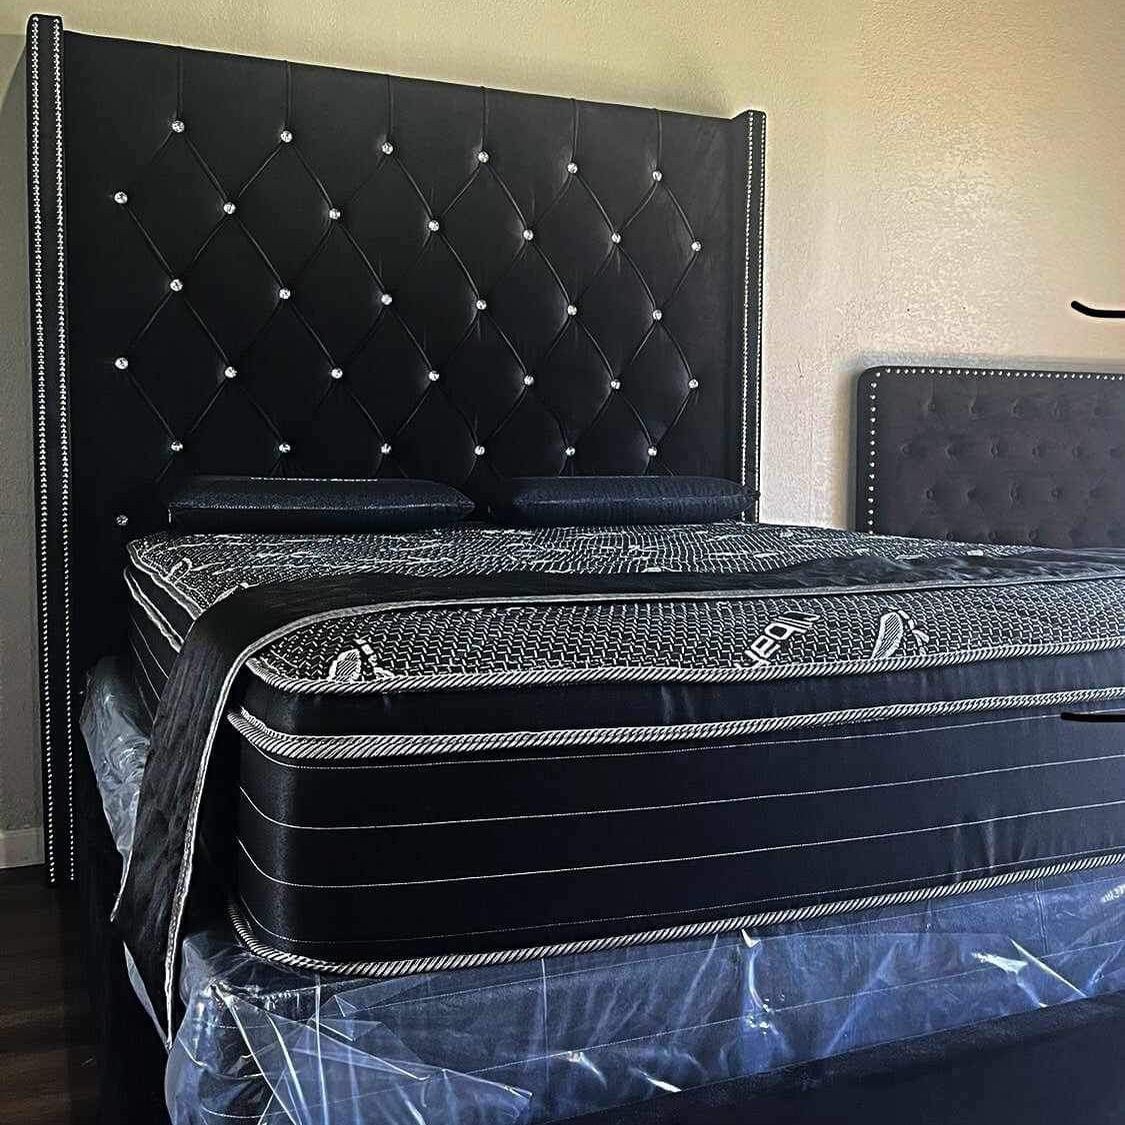 King & Queen Sizes Available / Complete Bed Frame With New Mattress Set